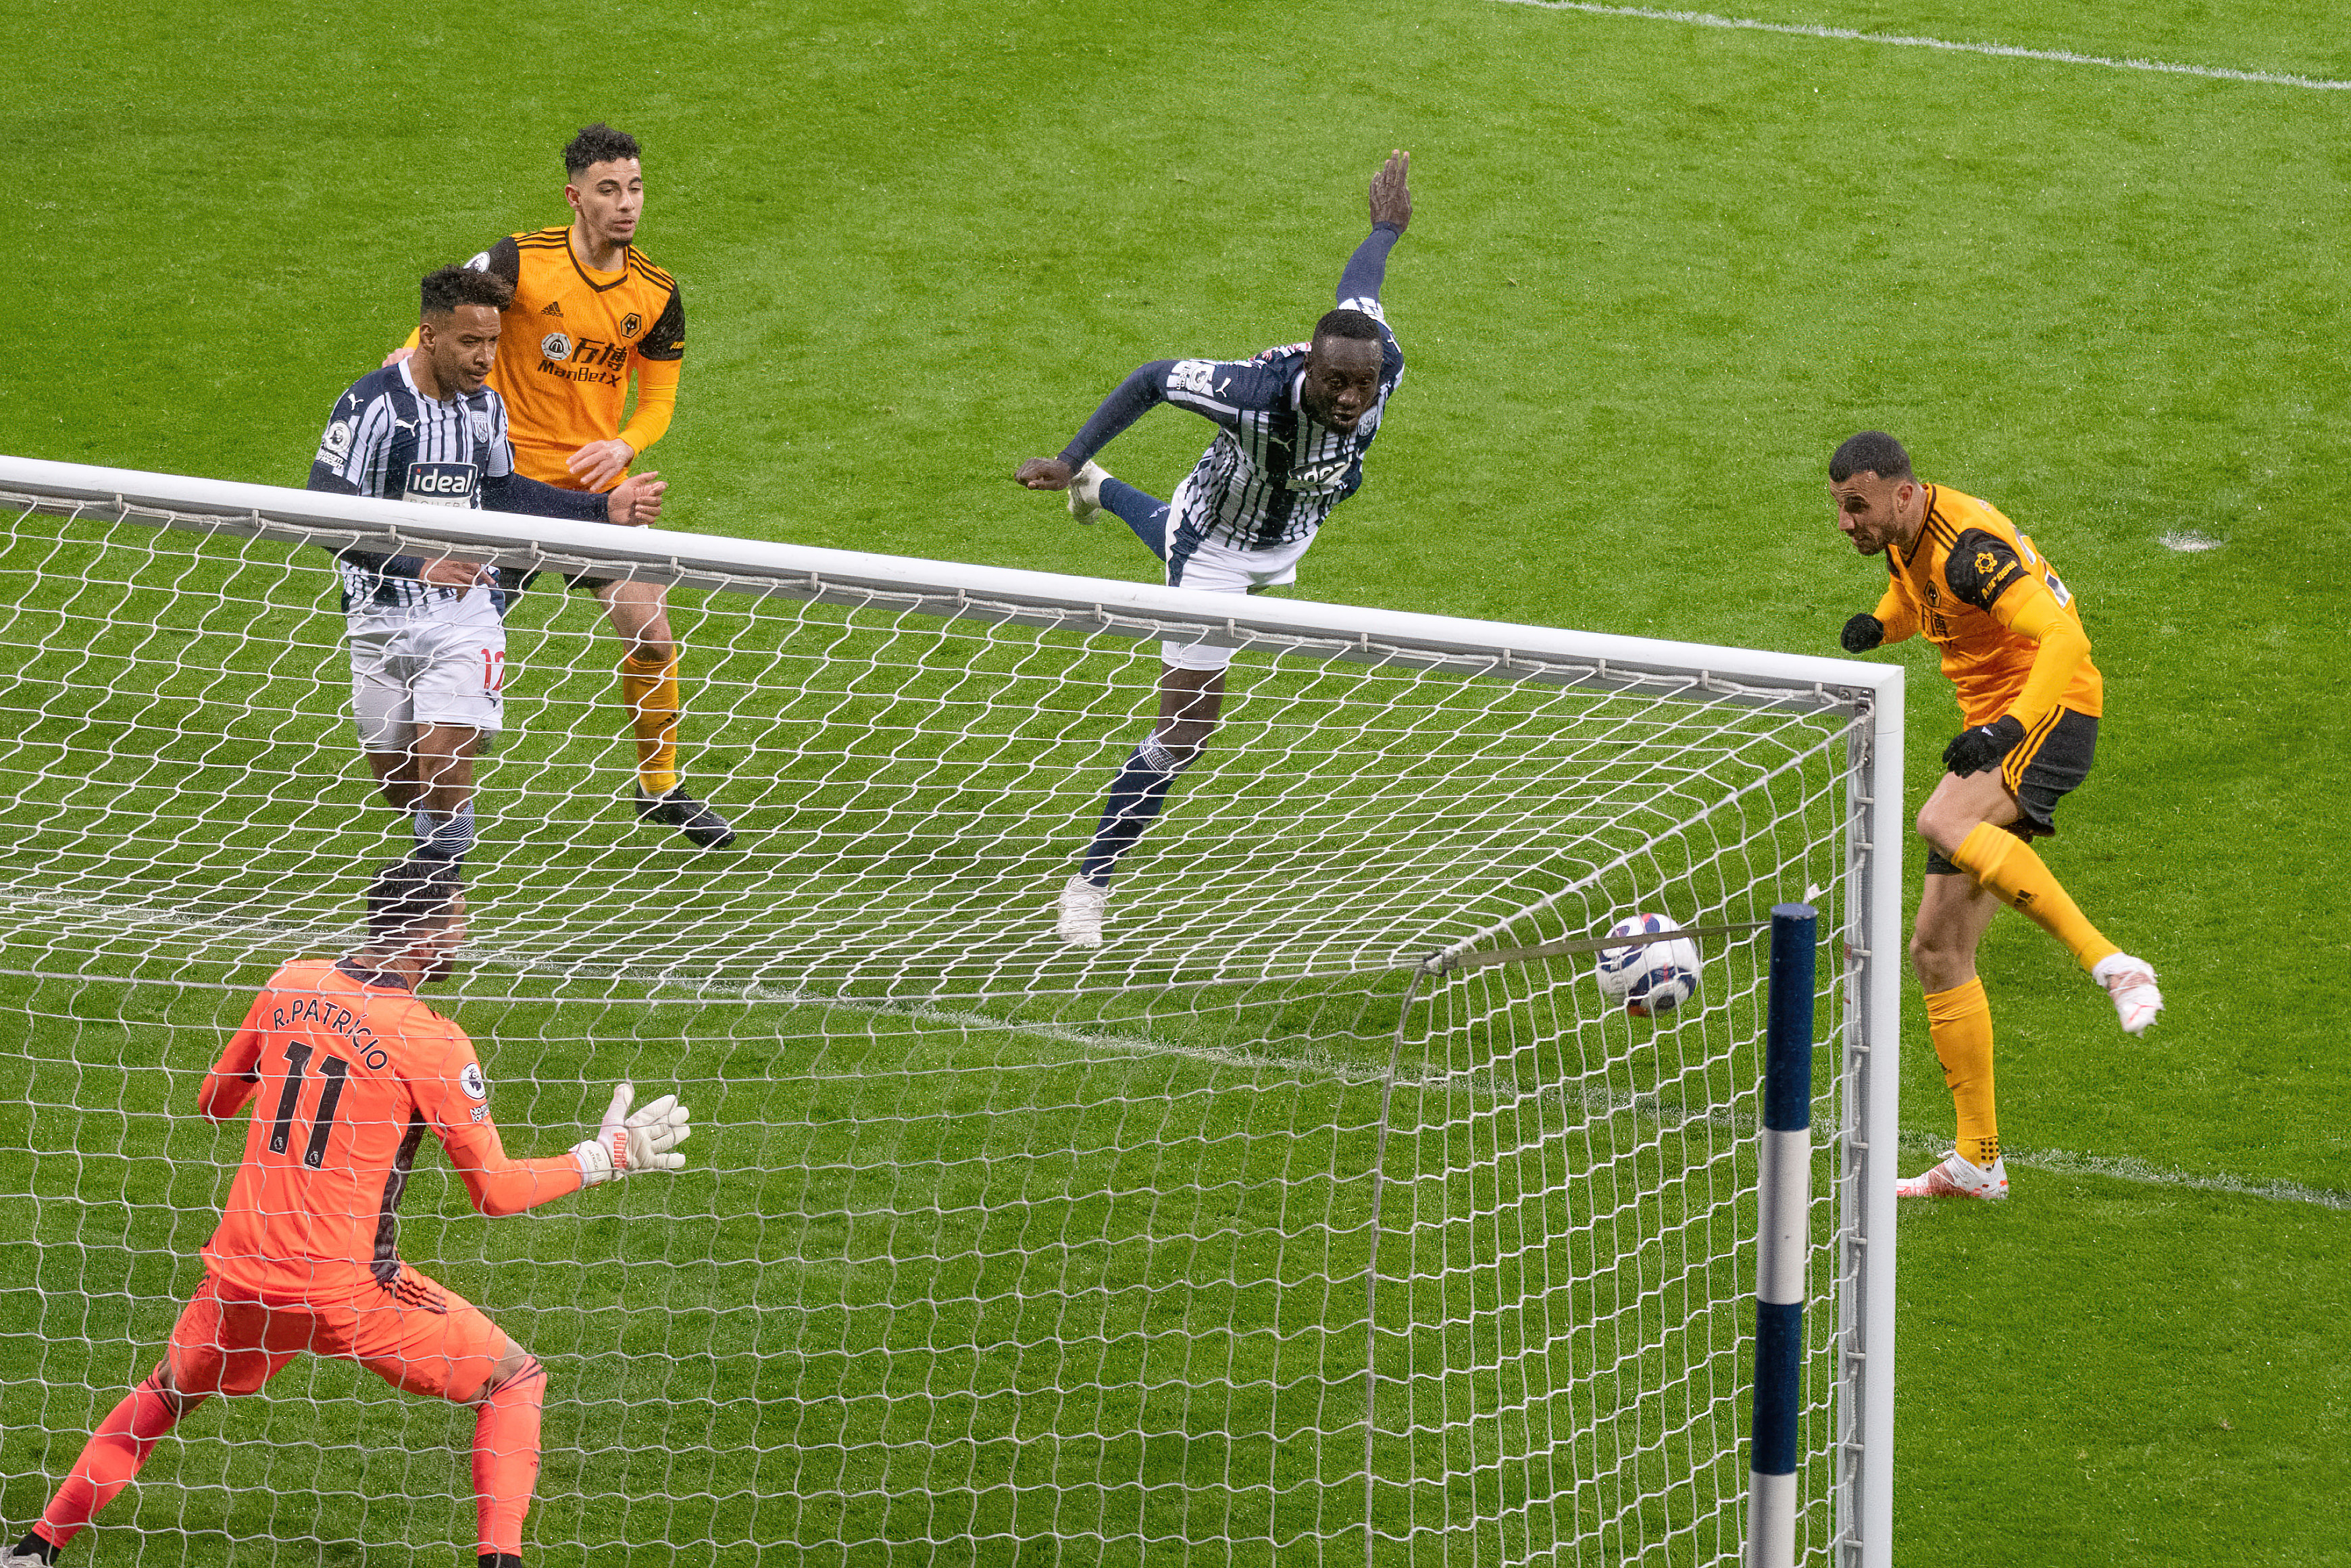 Mbaye Diagne scores a header against Wolves in May 2021